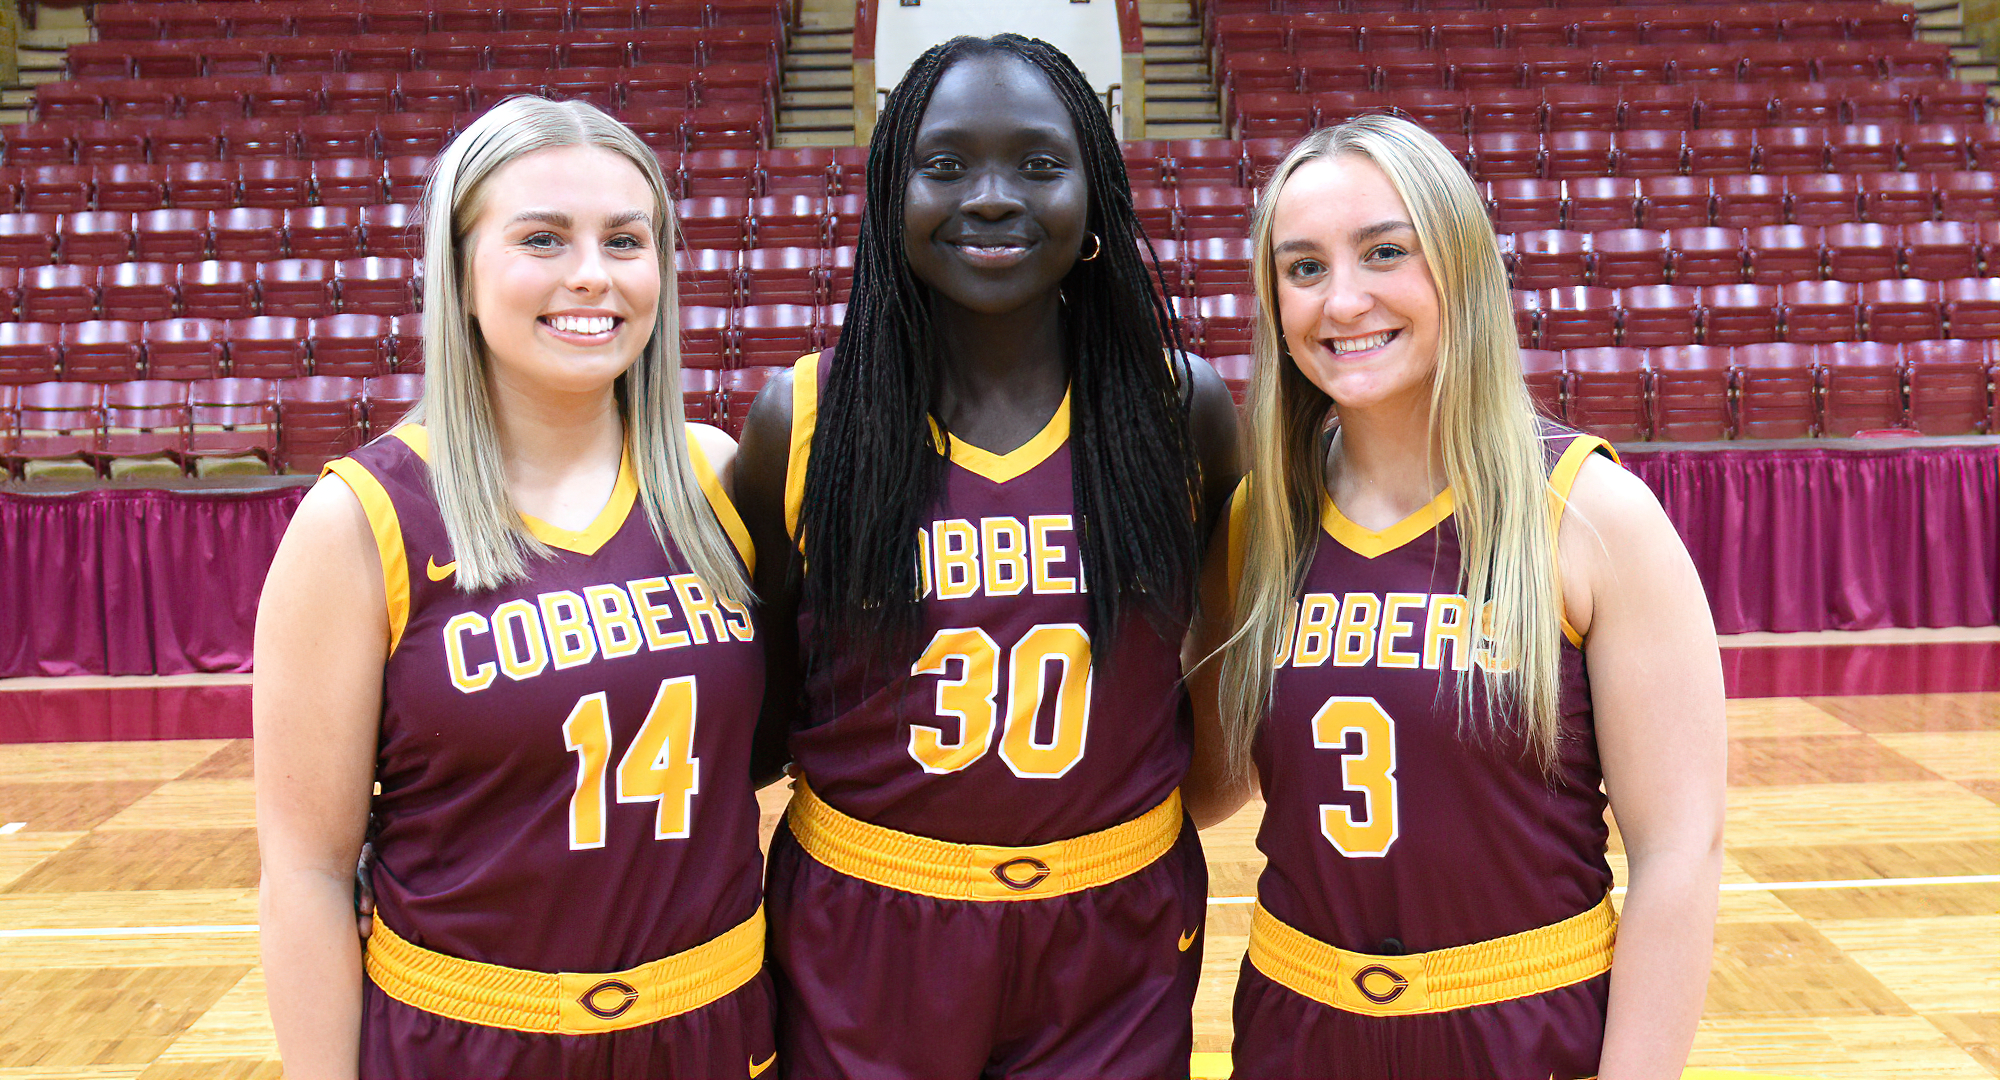 Concordia's three seniors (L-R: Kaylie Isaman, Mary Sem and Autumn Thompson) were honored at halftime of the Cobbers' 86-76 win over Hamline.